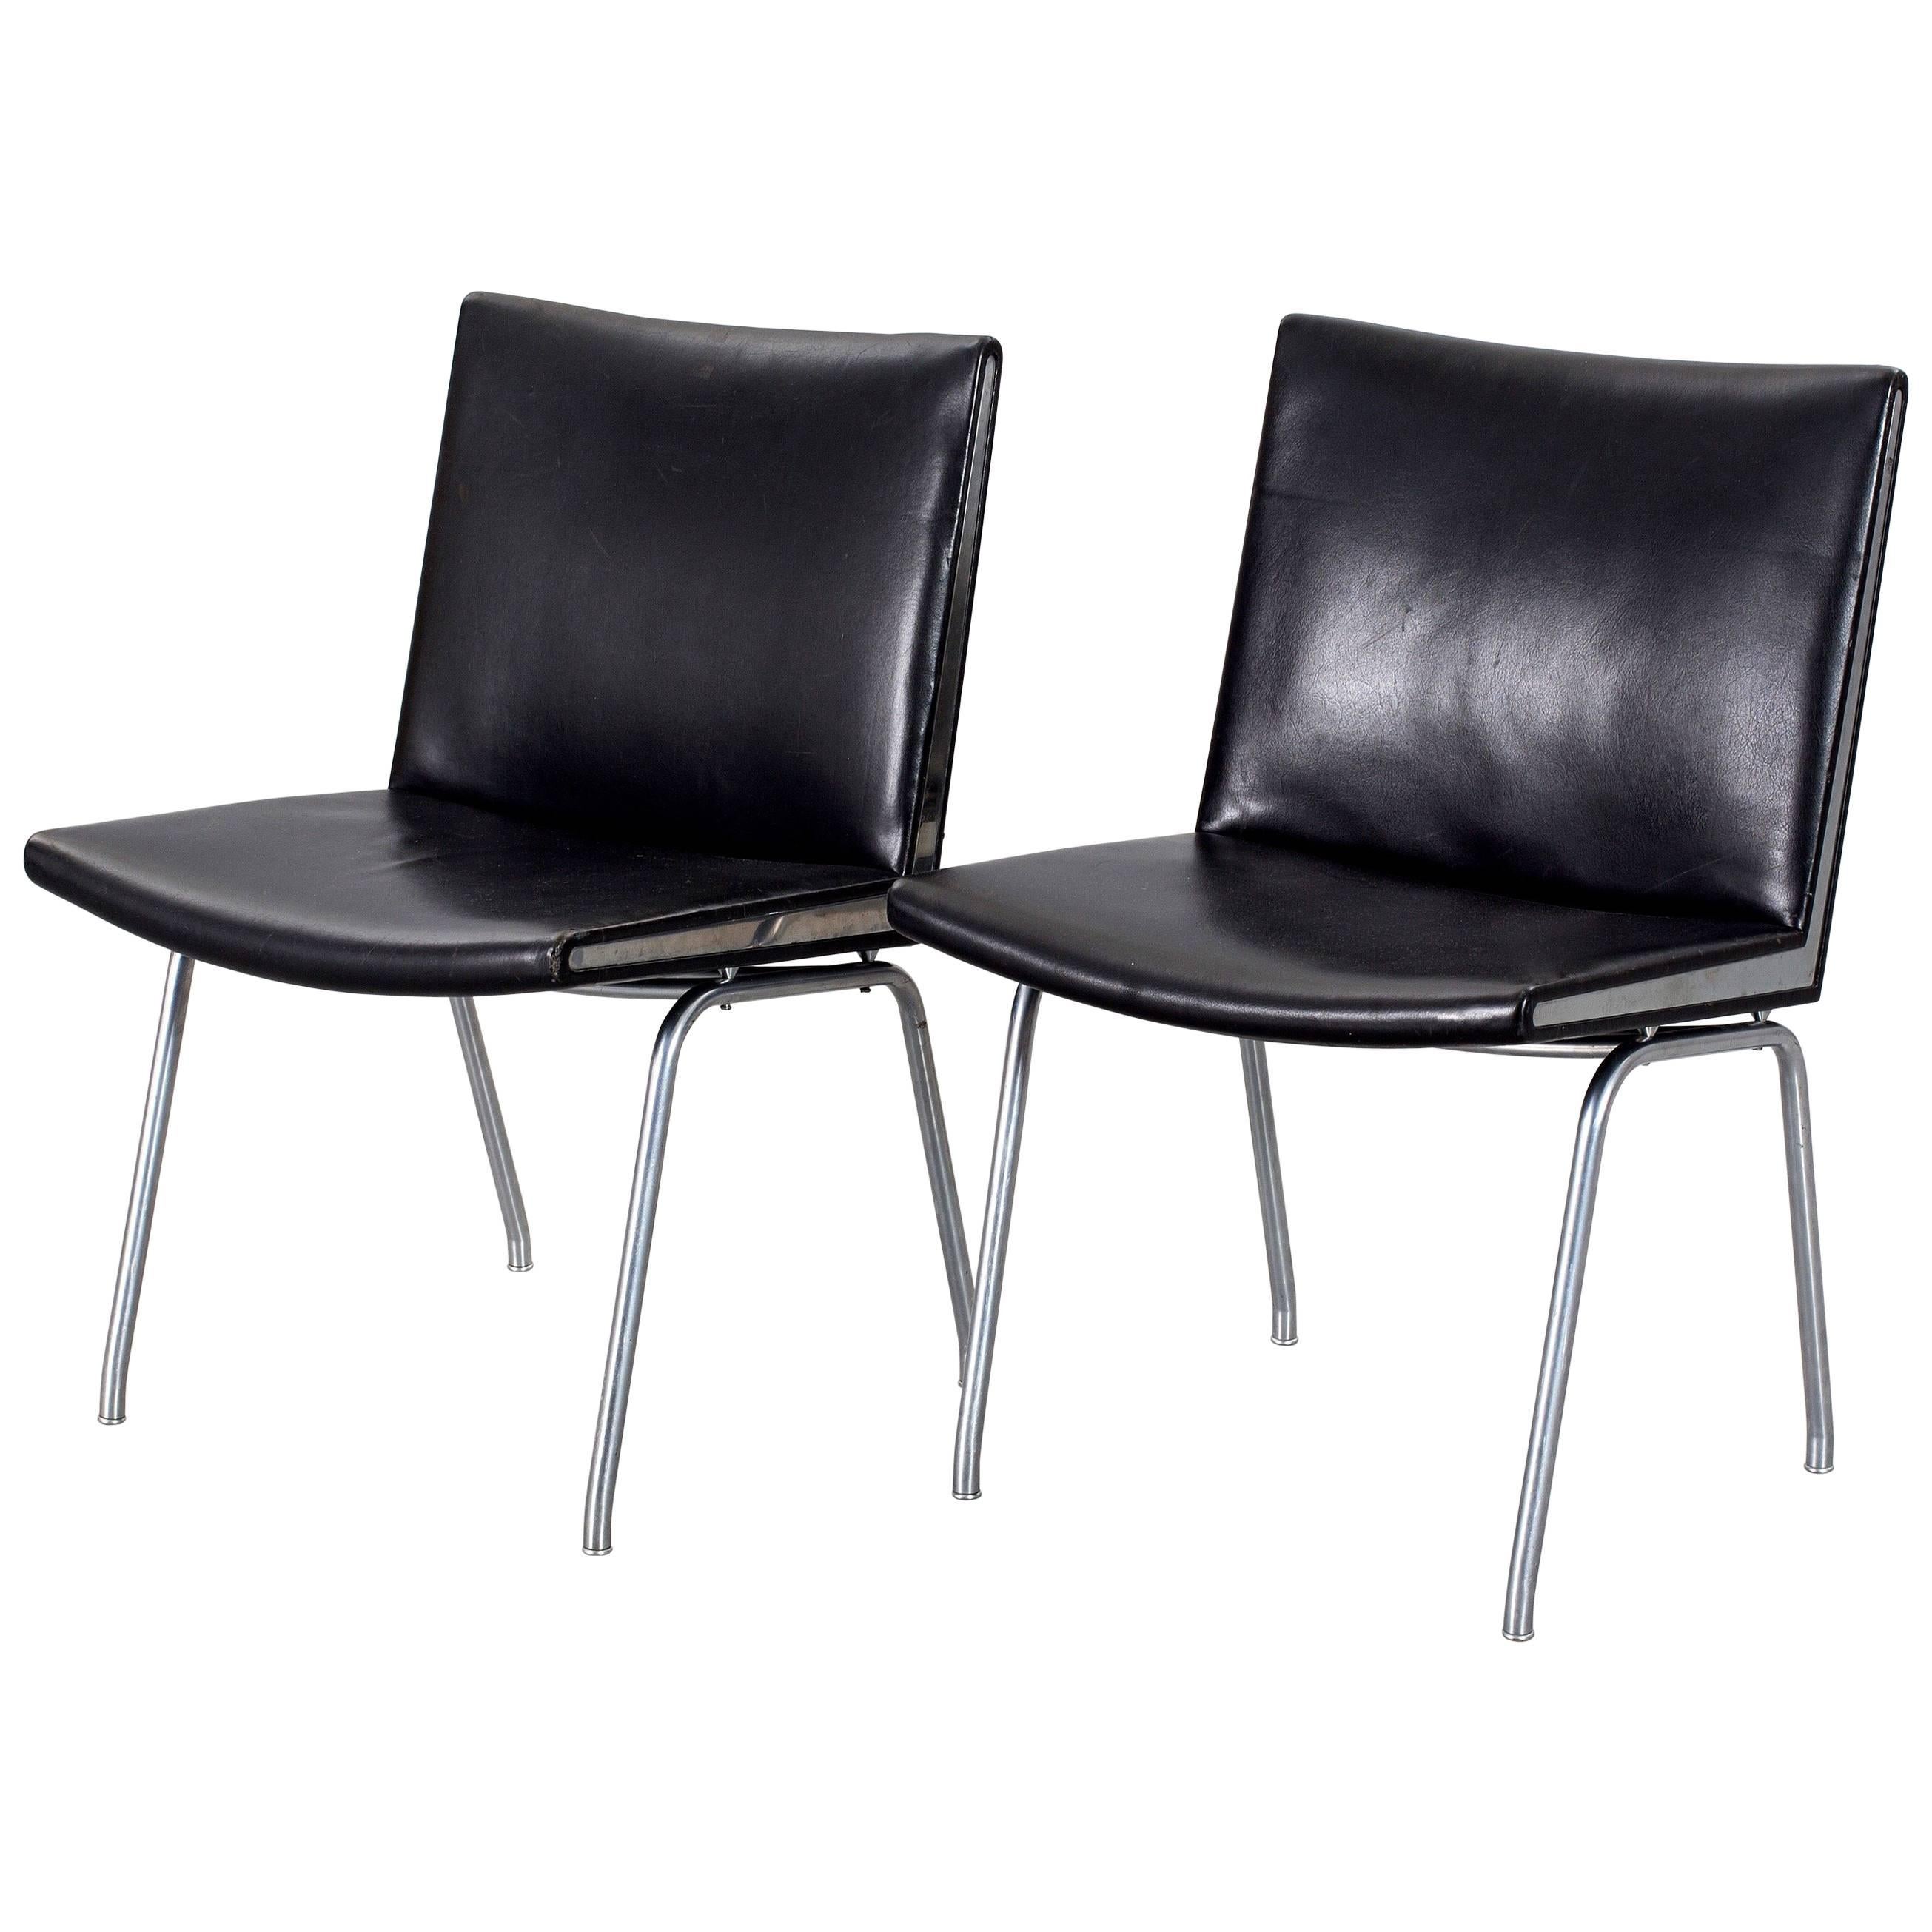 Pair of Ap-40 Black Leather Airport Chairs by Hans J. Wegner for Ap-Stolen, 1950 For Sale